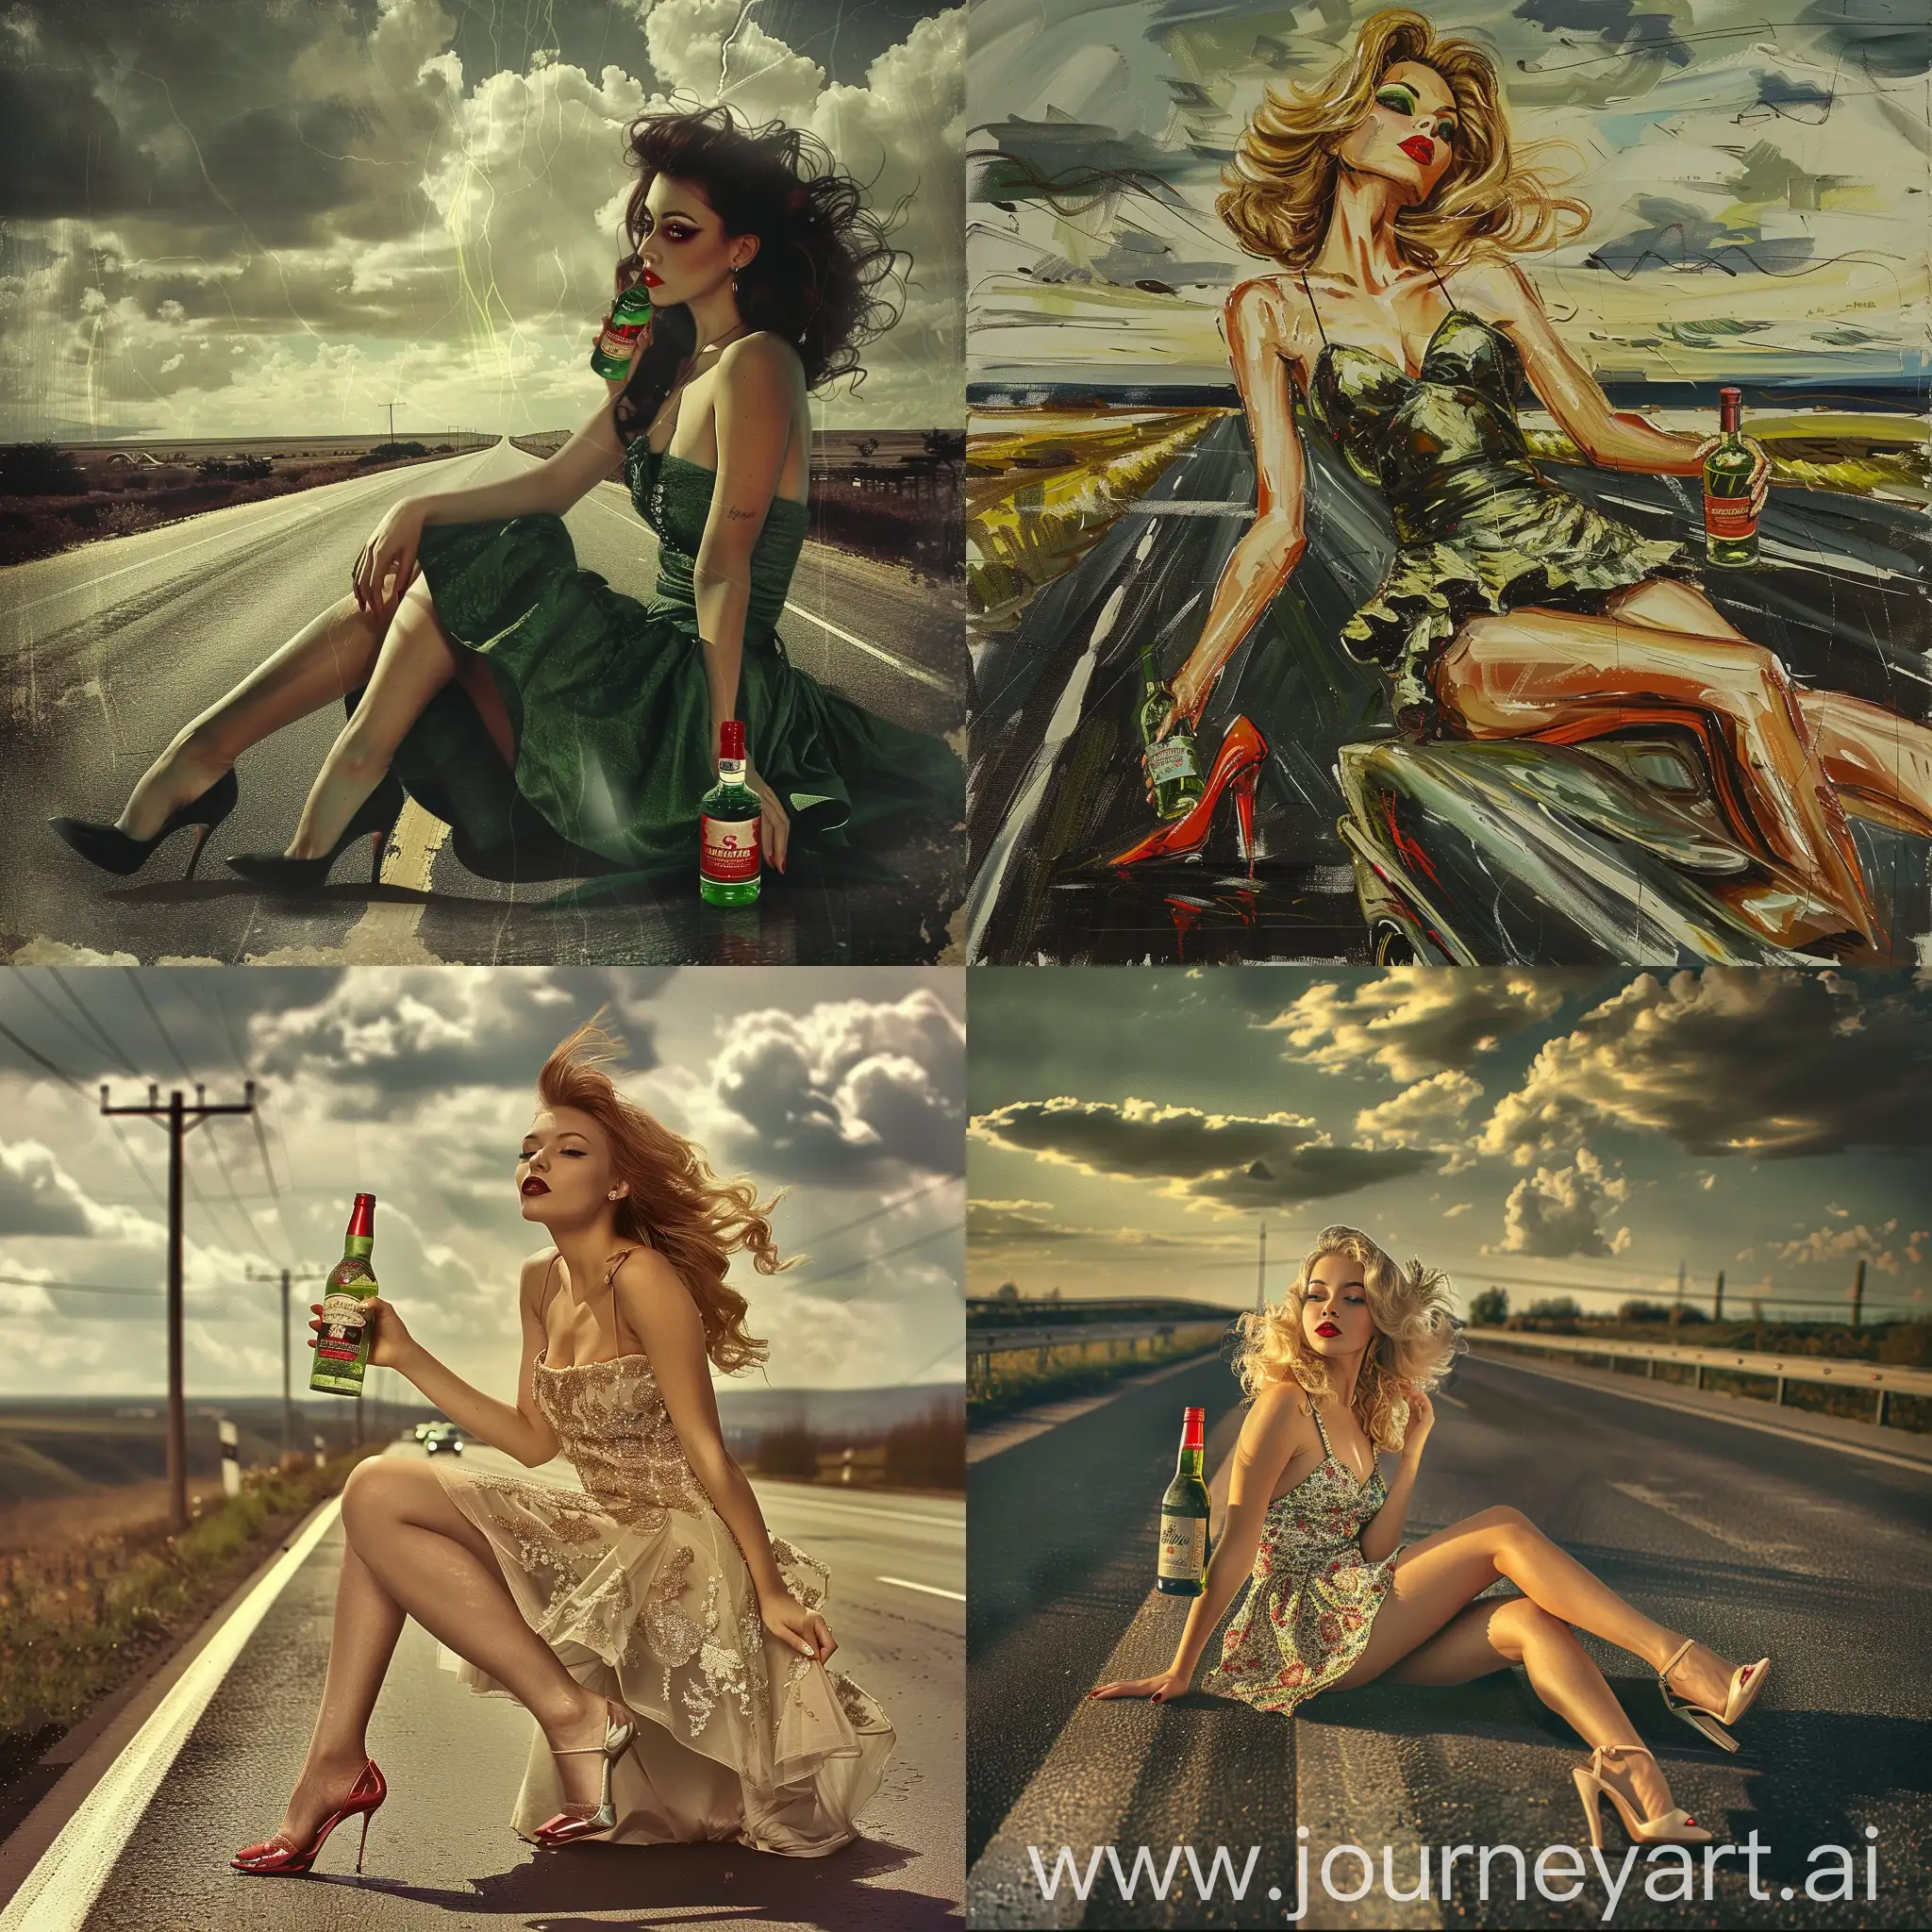 Stylish-Woman-with-Red-Lipstick-and-Absinthe-Bottle-on-Highway